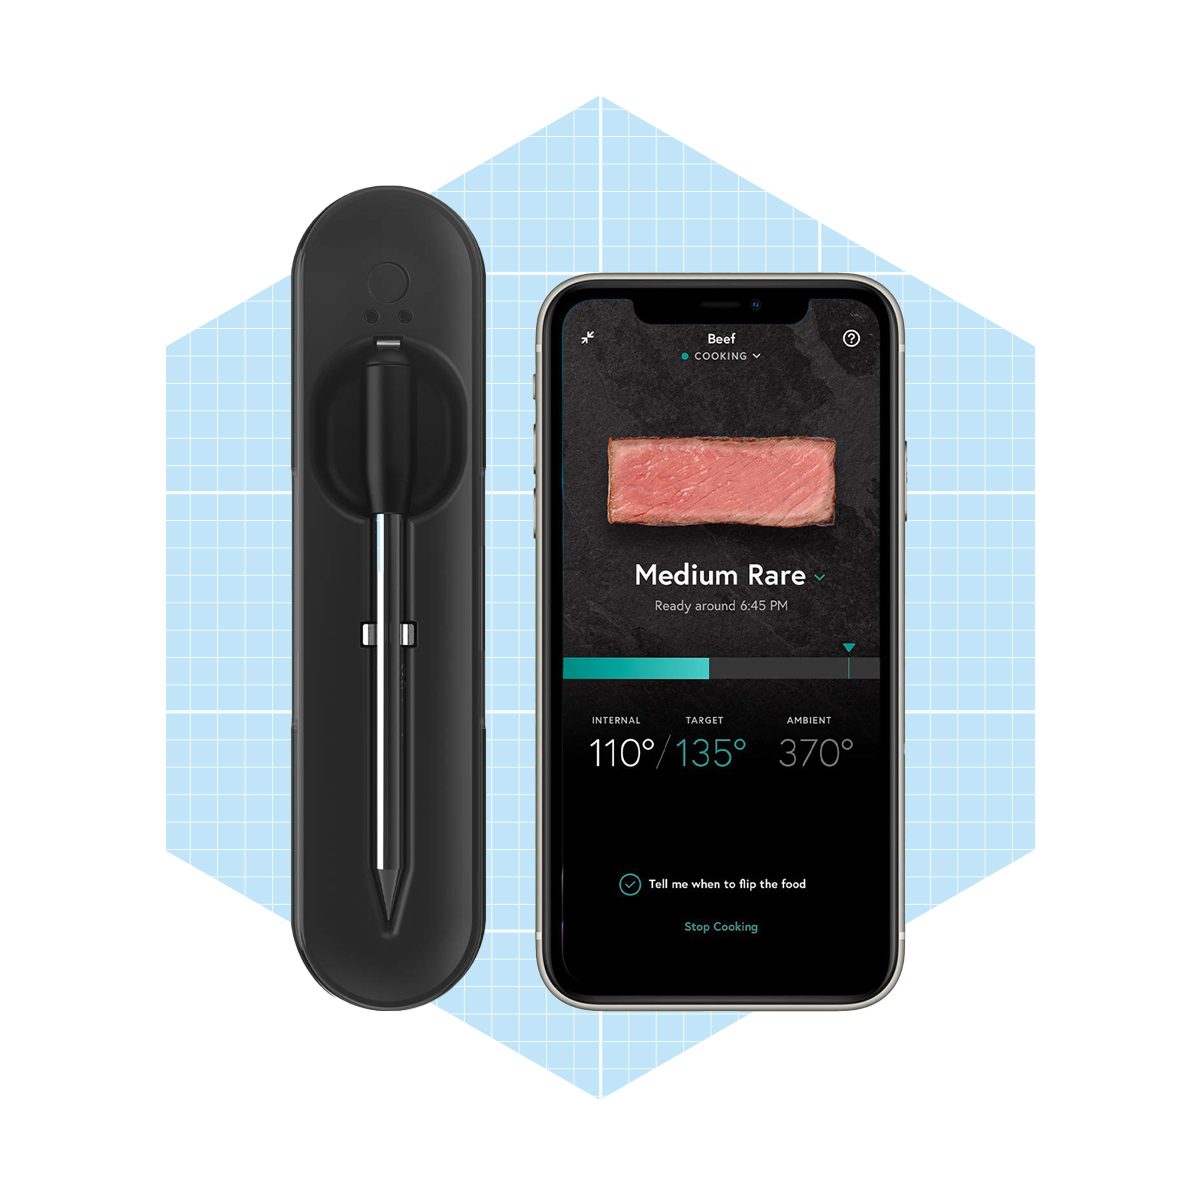 Yummly  Smart Thermometer on Instagram: Using your Yummly